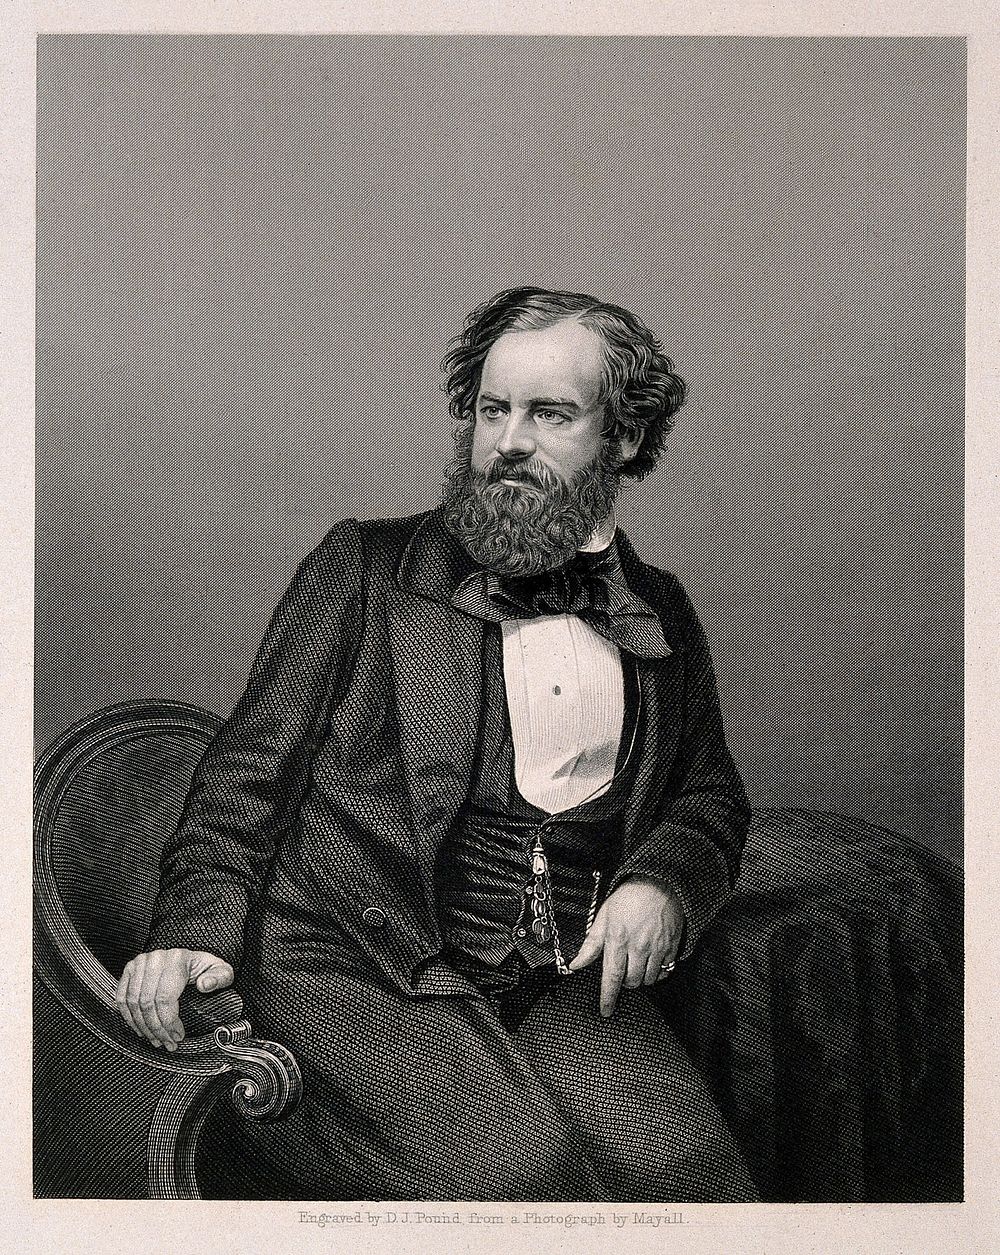 Albert Richard Smith. Stipple engraving by D. J. Pound, 1852, after J. Mayall.